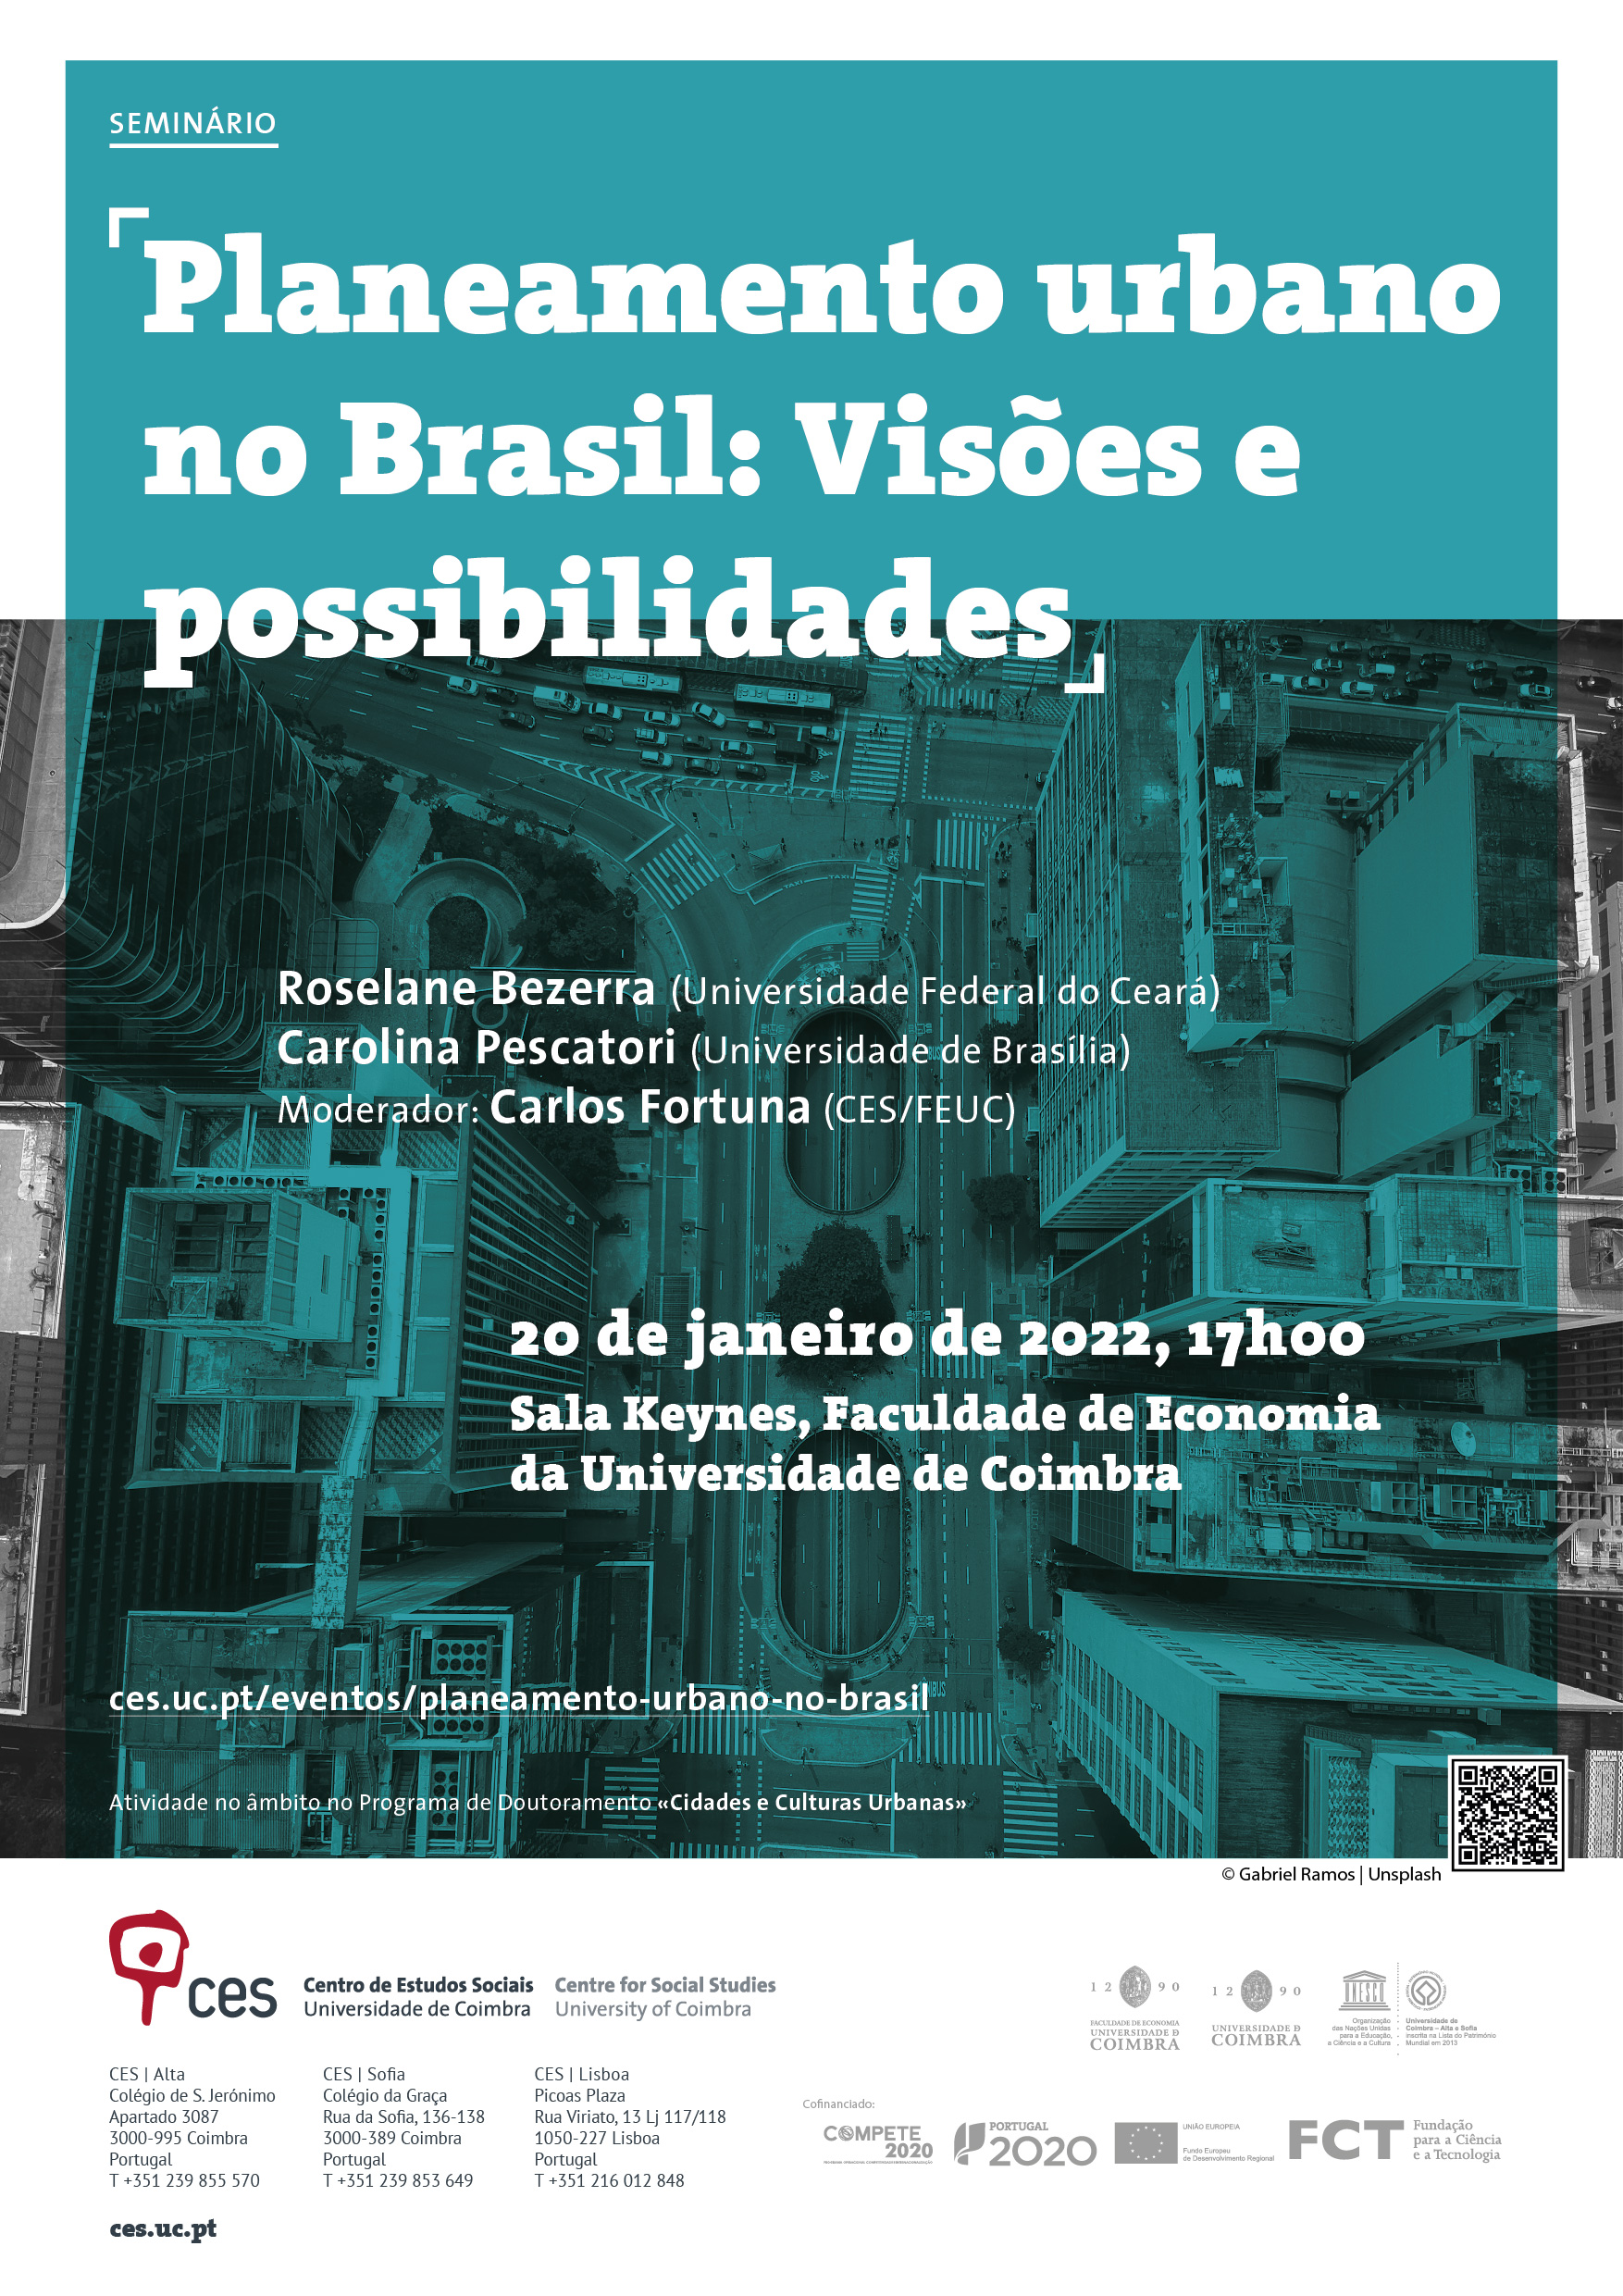 Urban planning in Brazil: visions and possibilities<span id="edit_36865"><script>$(function() { $('#edit_36865').load( "/myces/user/editobj.php?tipo=evento&id=36865" ); });</script></span>